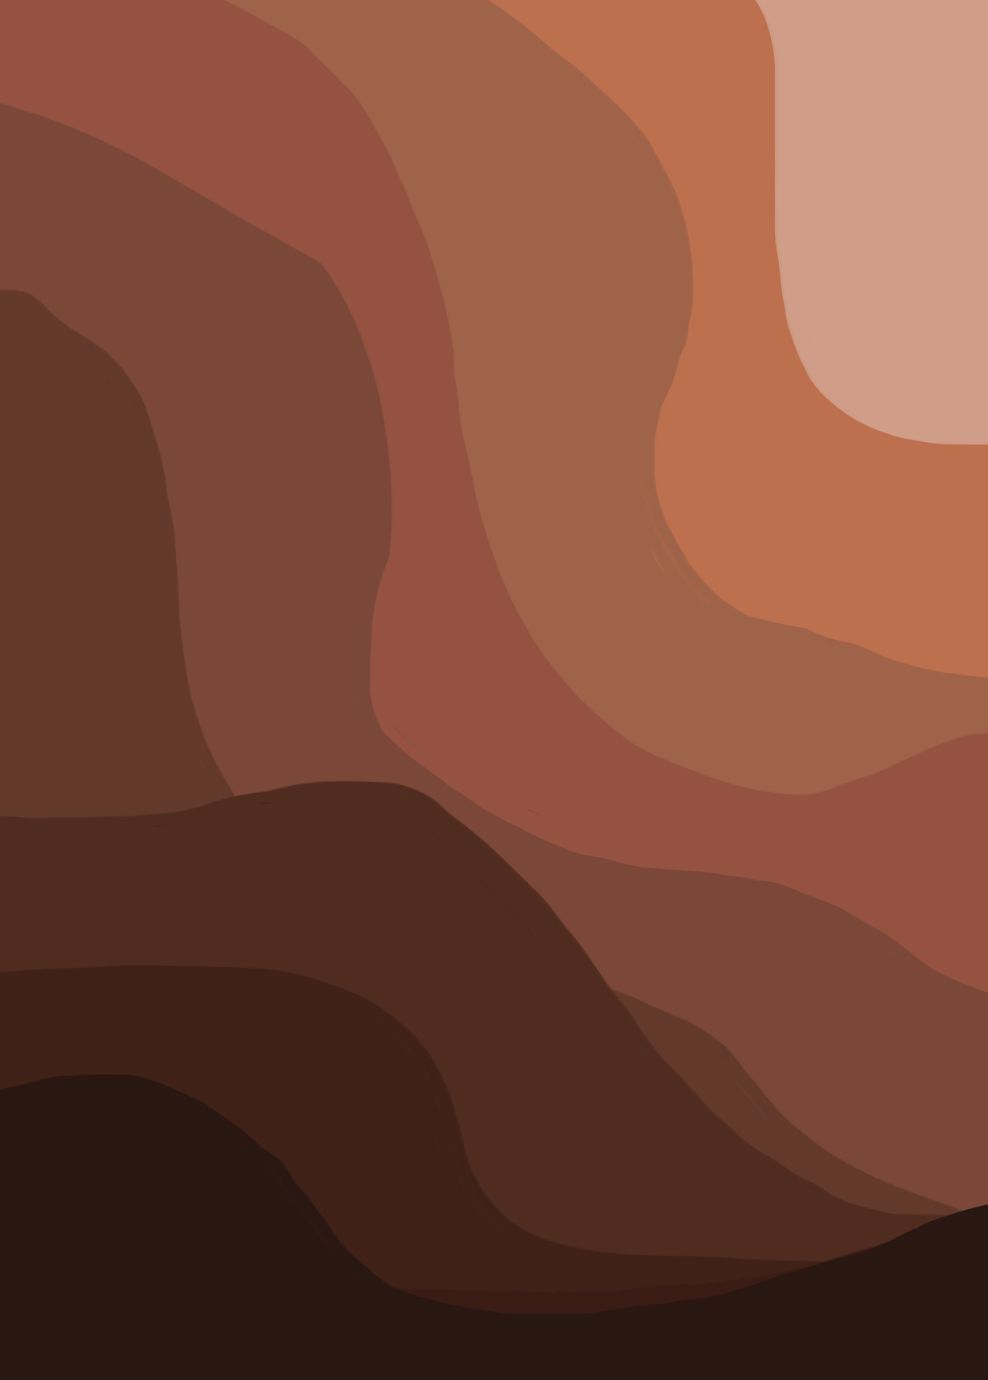 A warm-toned abstract image of layered brown shapes. - Terracotta